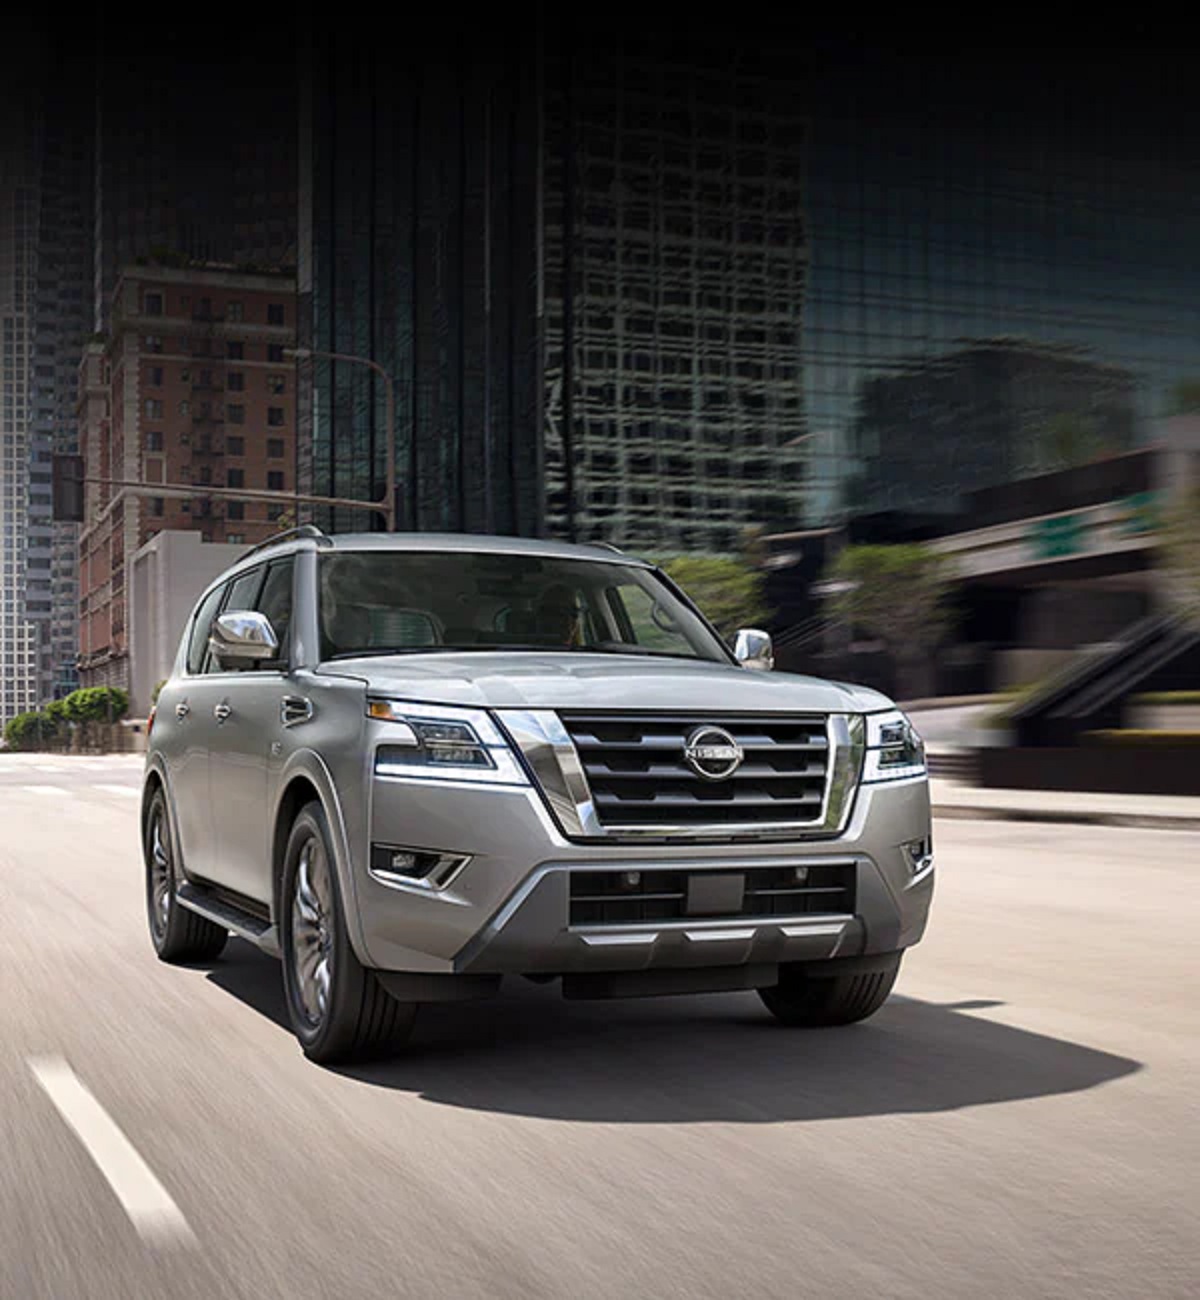 A silver 2021 Nissan Armada driving down a highway.